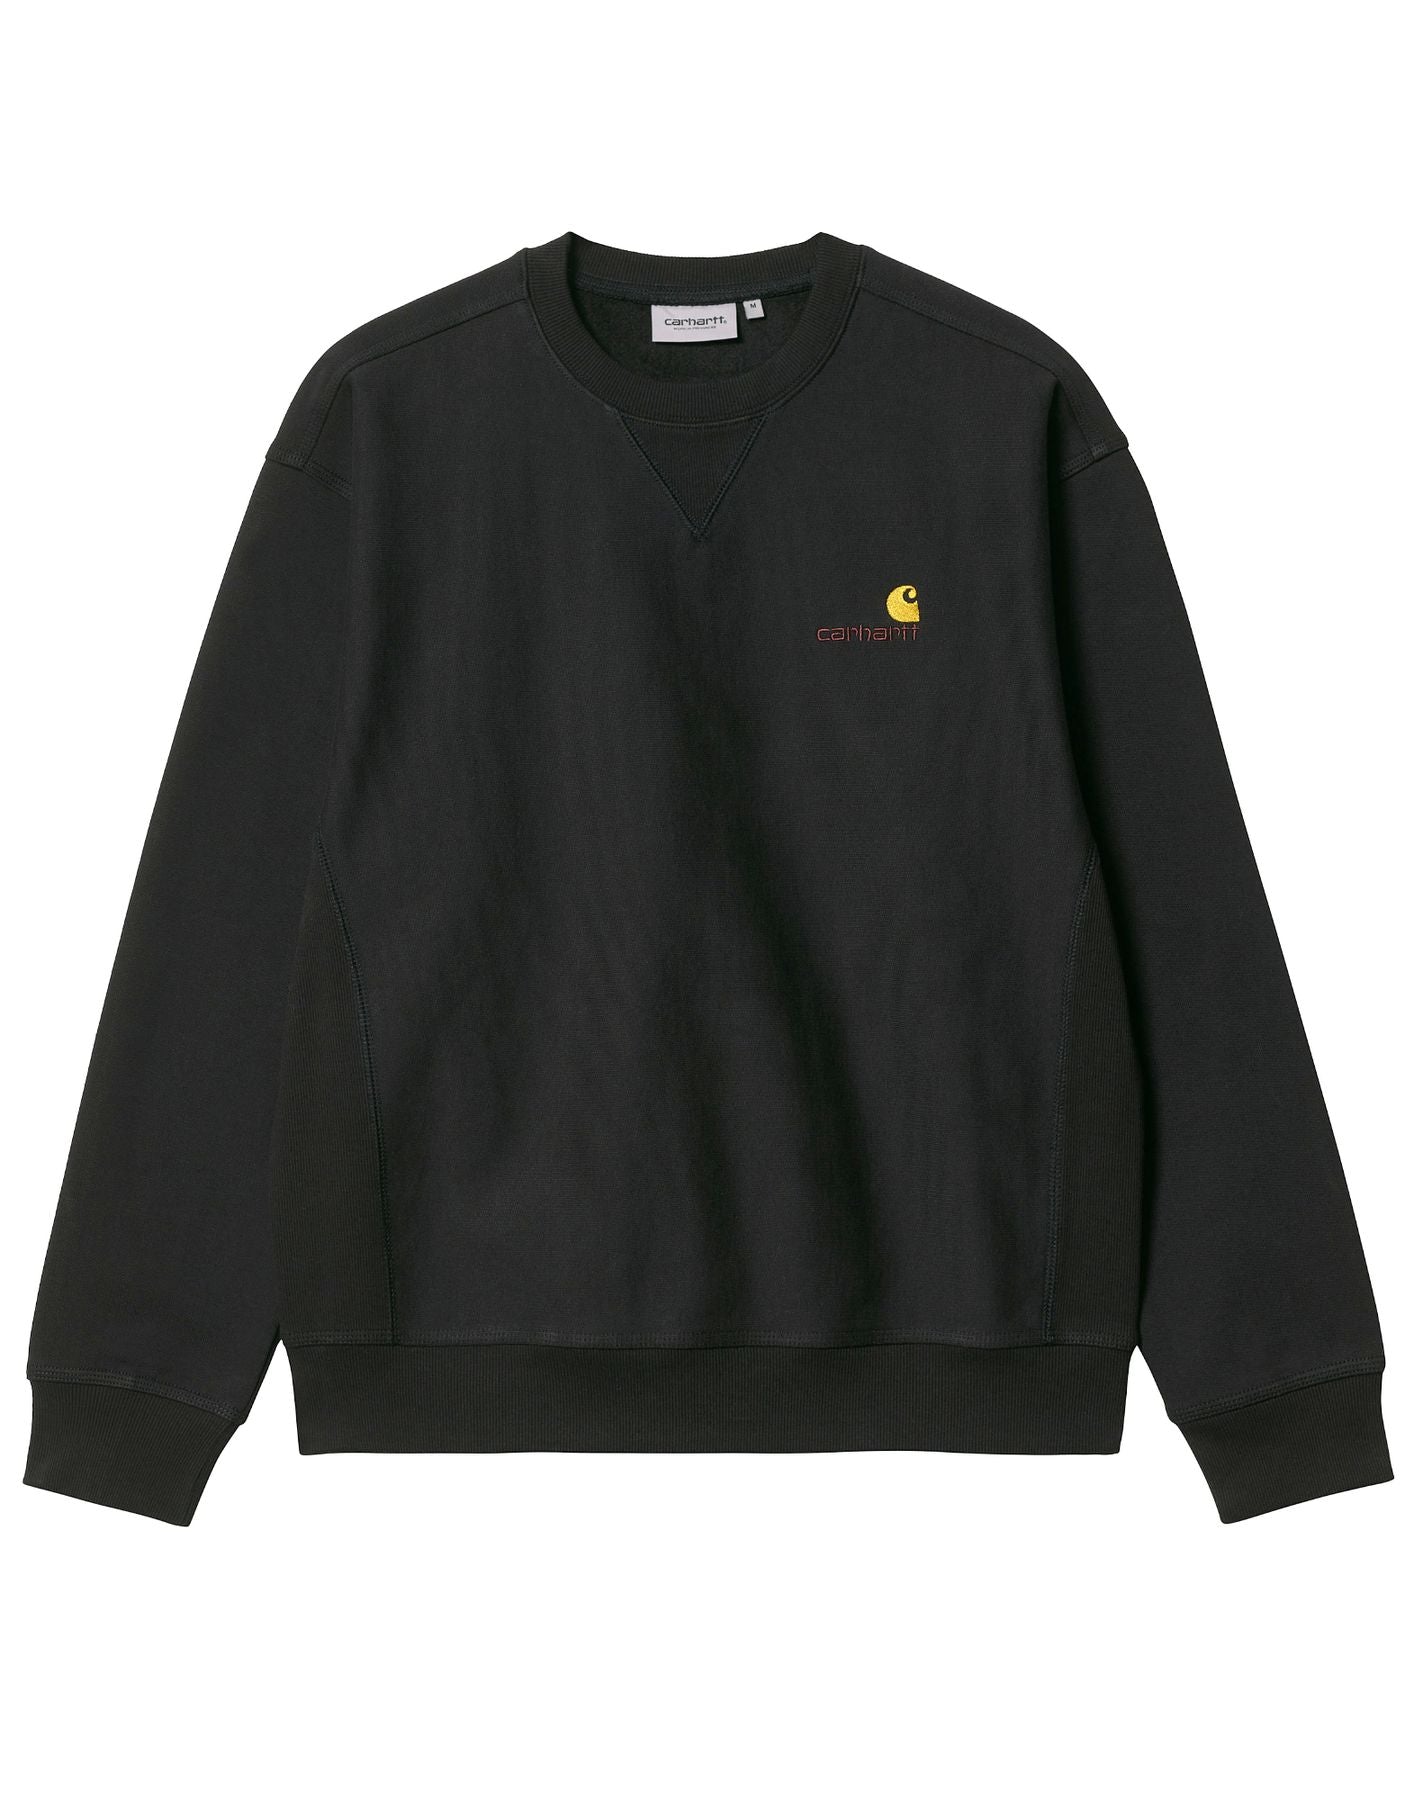 Sweat-shirt pour homme I025475 BLACK CARHARTT WIP